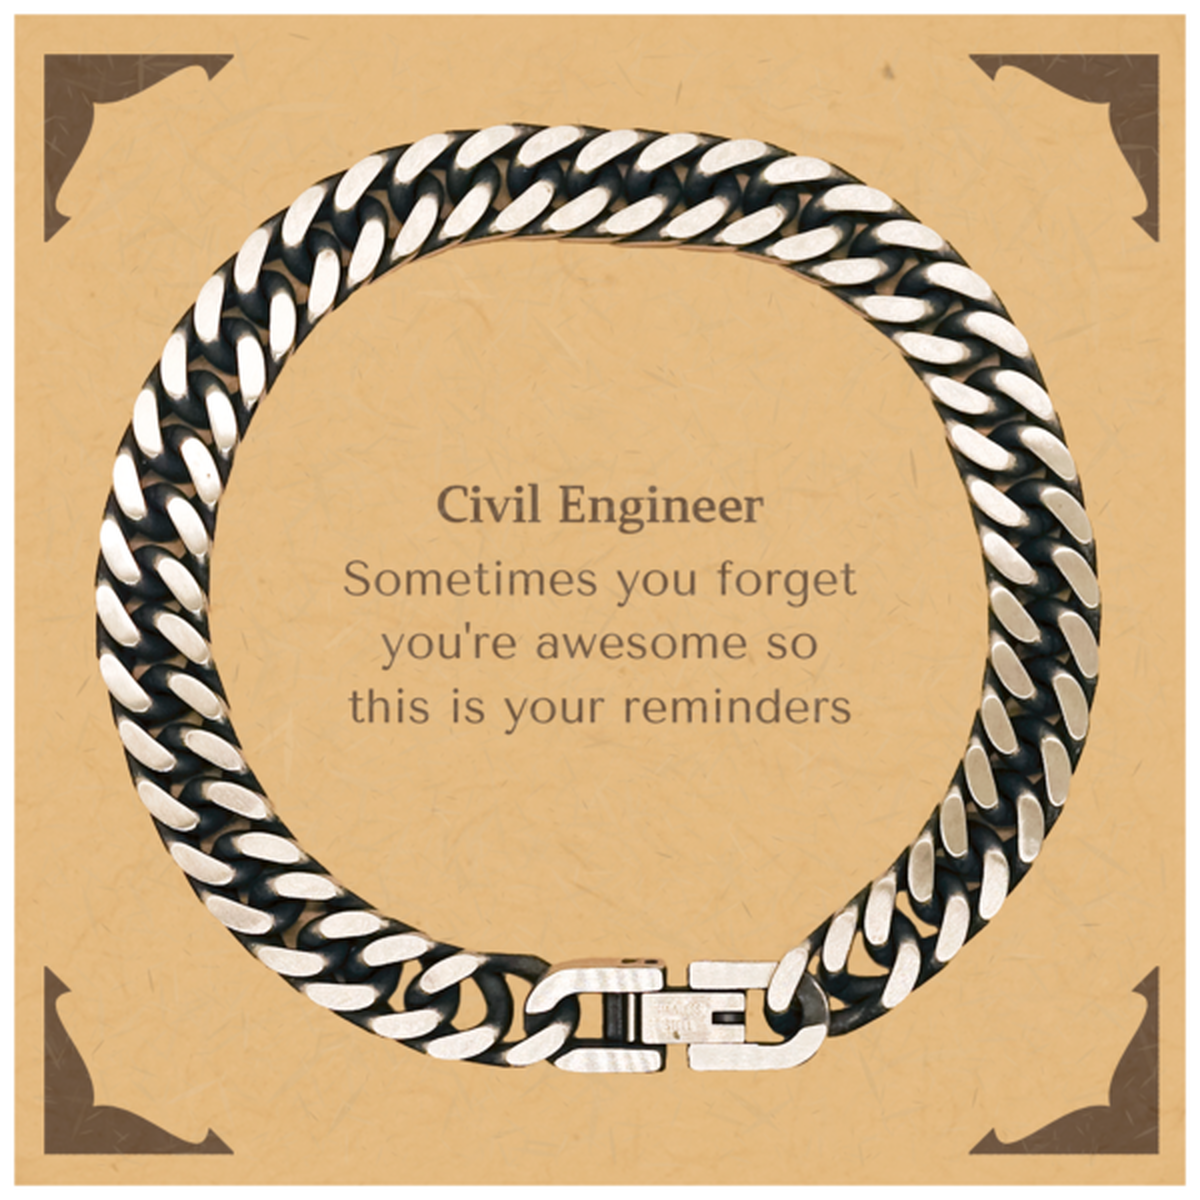 Sentimental Civil Engineer Cuban Link Chain Bracelet, Civil Engineer Sometimes you forget you're awesome so this is your reminders, Graduation Christmas Birthday Gifts for Civil Engineer, Men, Women, Coworkers